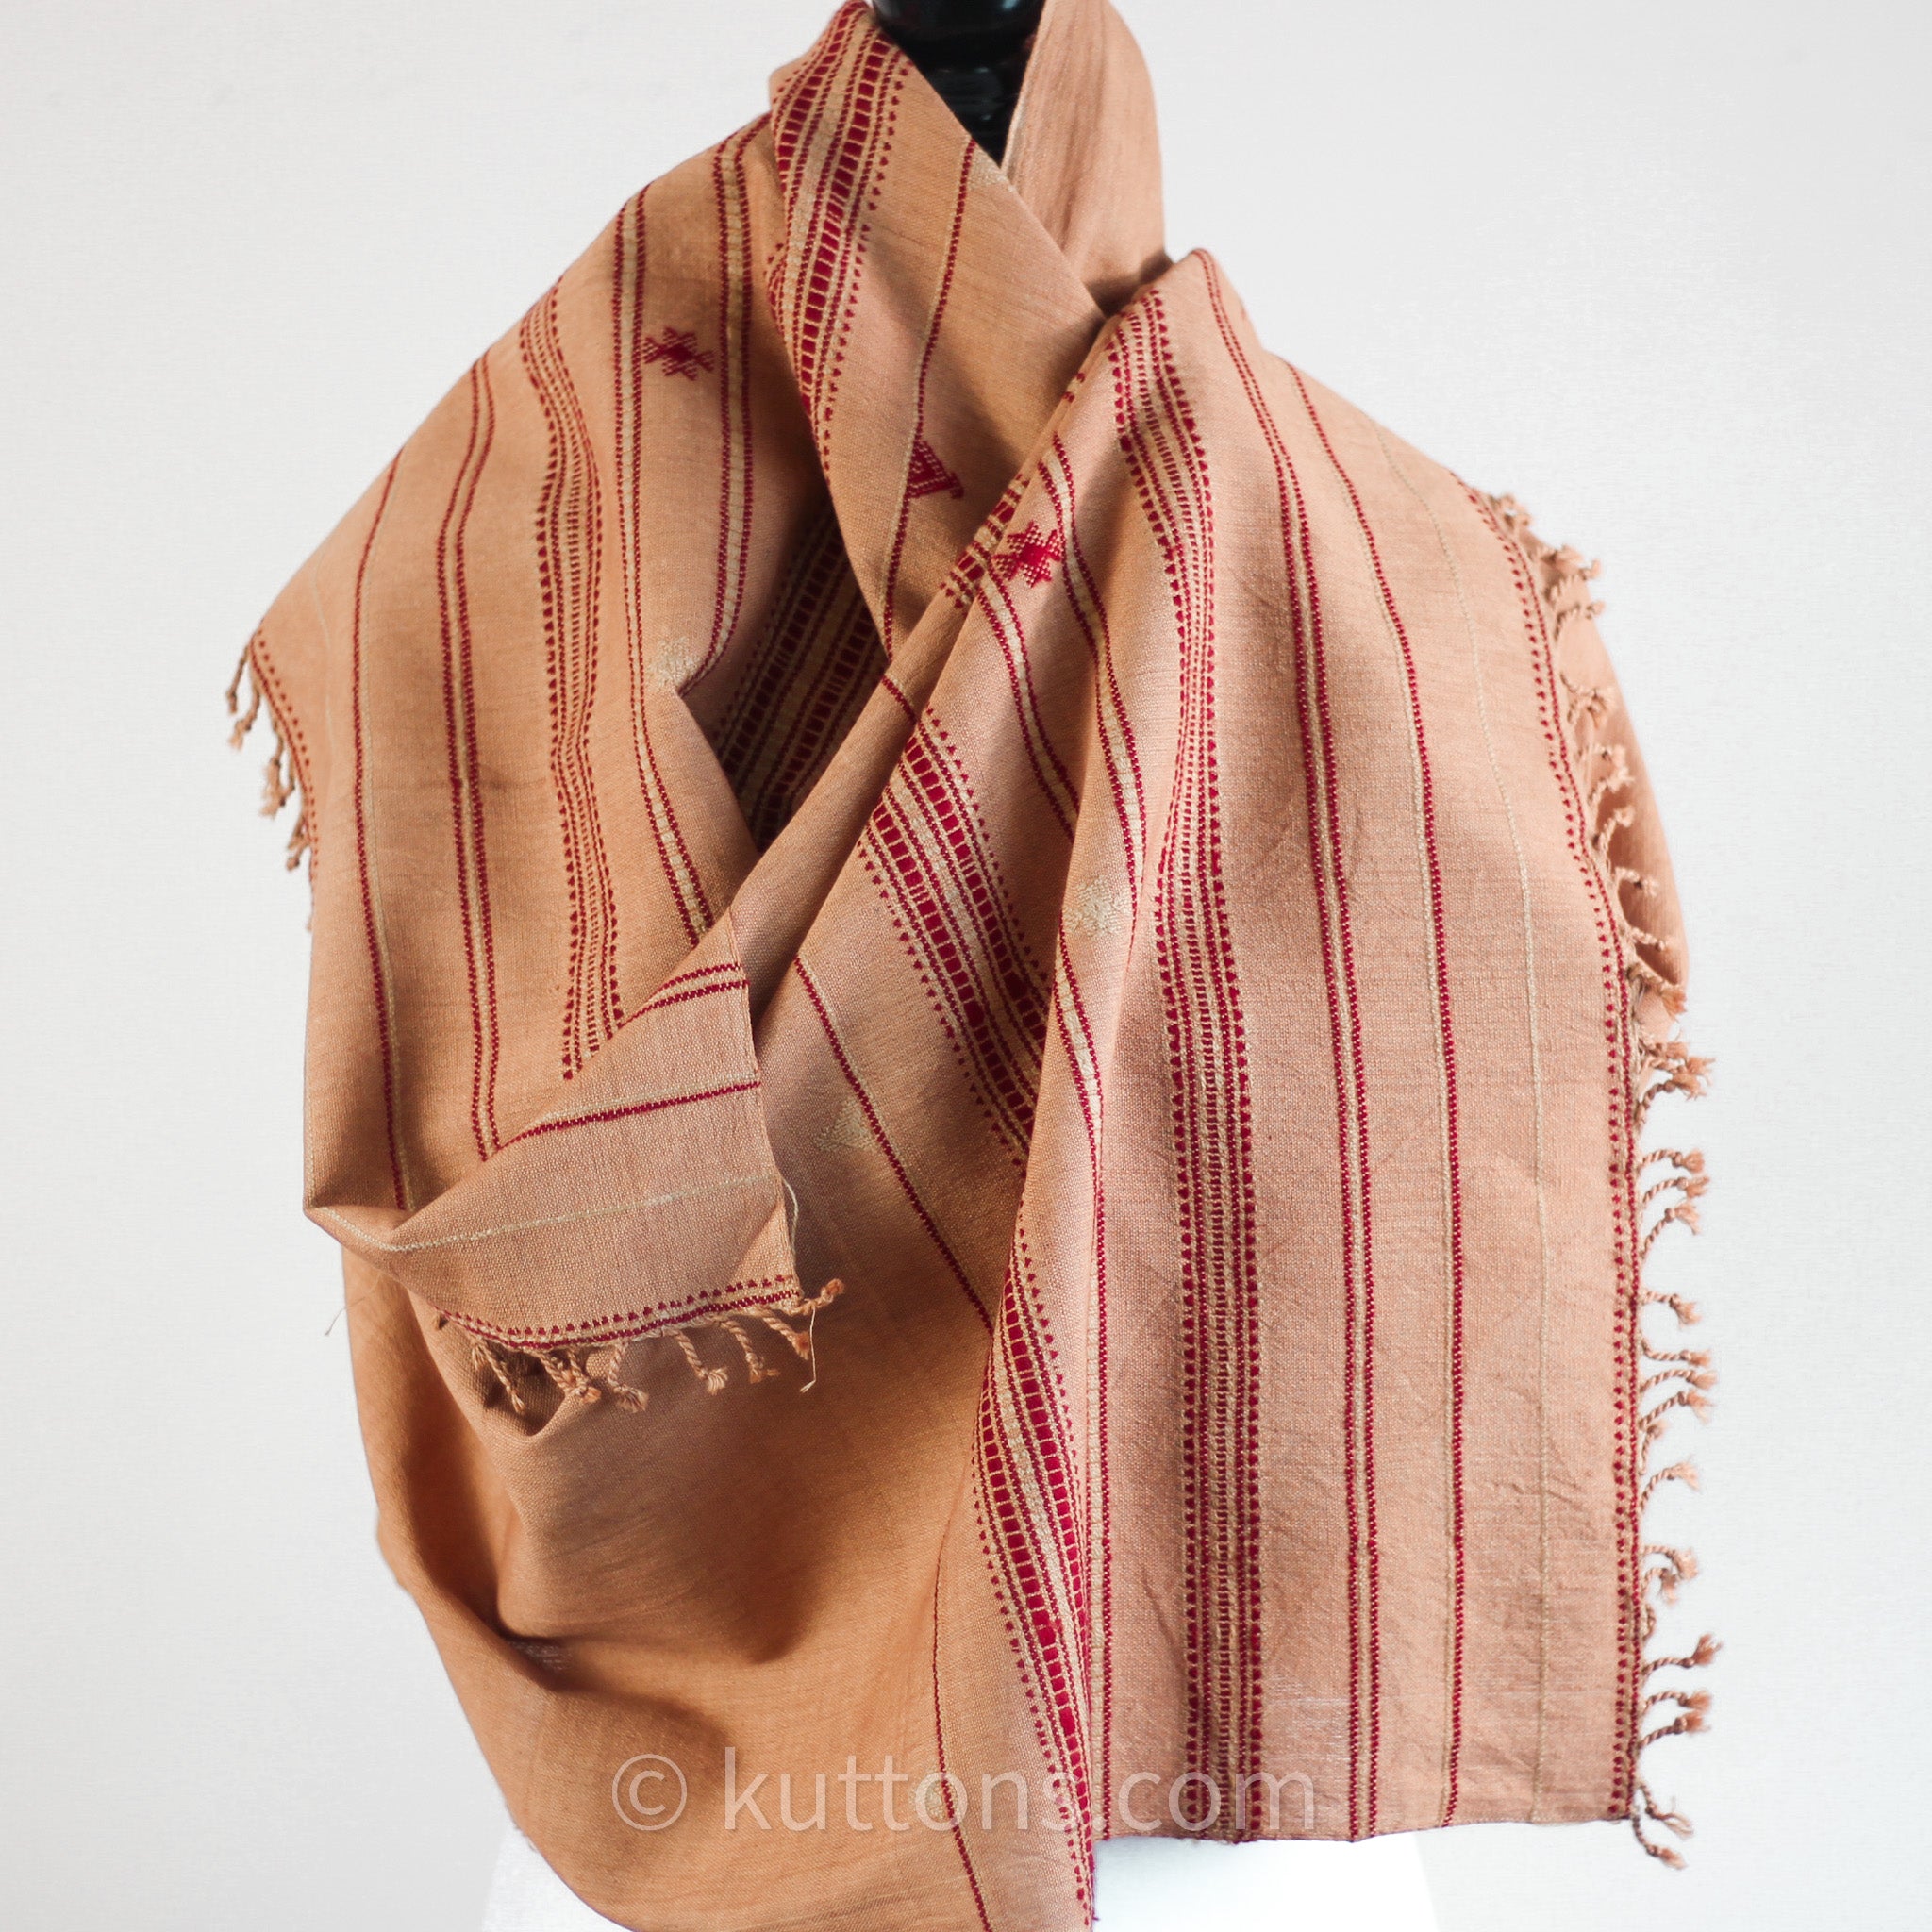 Kala Cotton Scarf Handwoven Wrap with Tassels | Brown, 23x74 – Kuttons